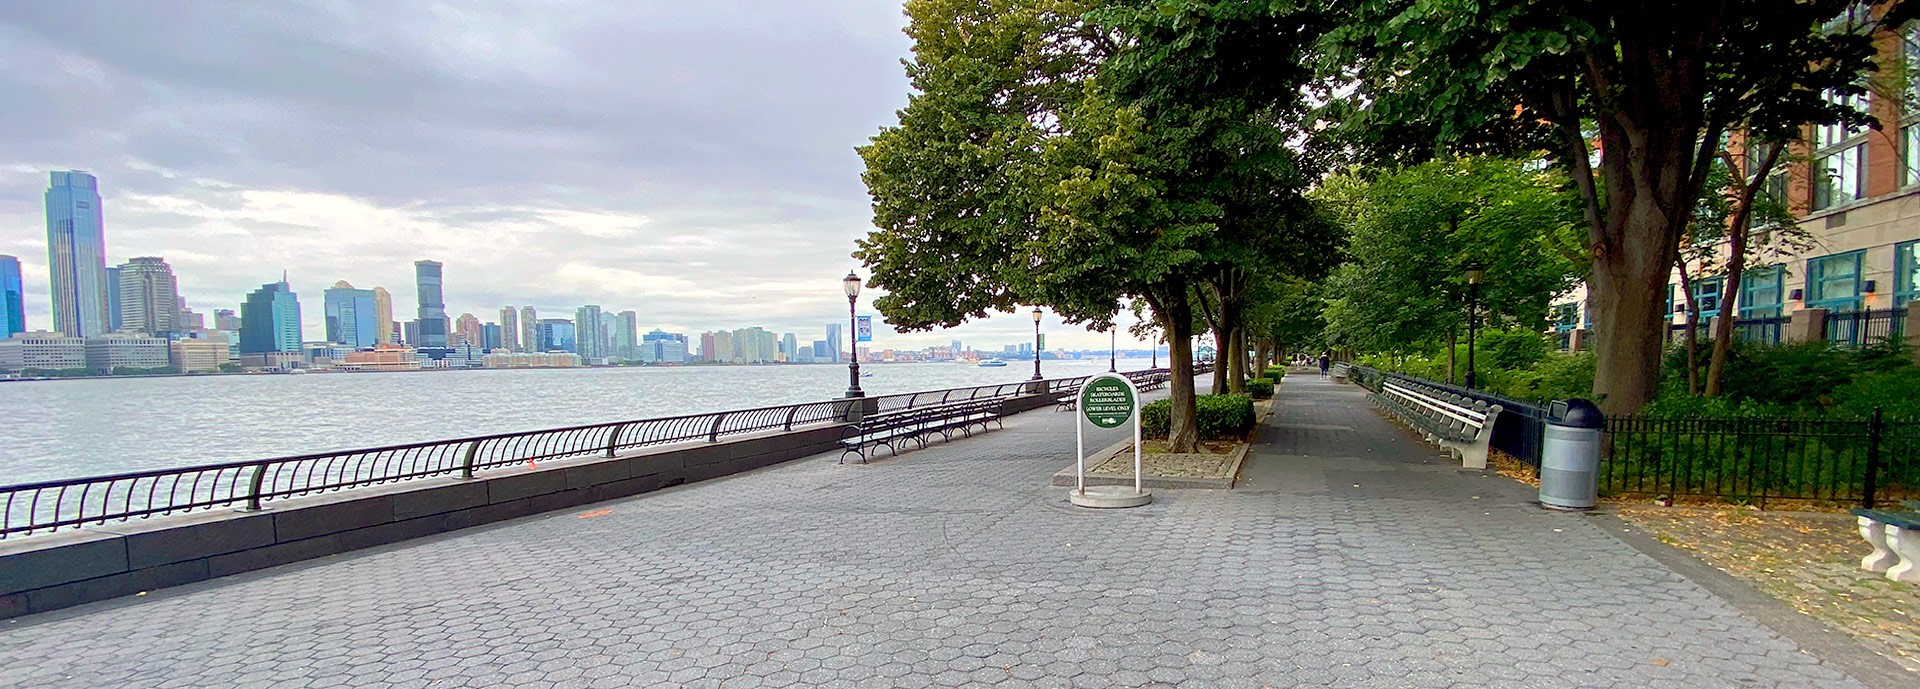 view of boardwalk pier in battery park with trees on right and water on left